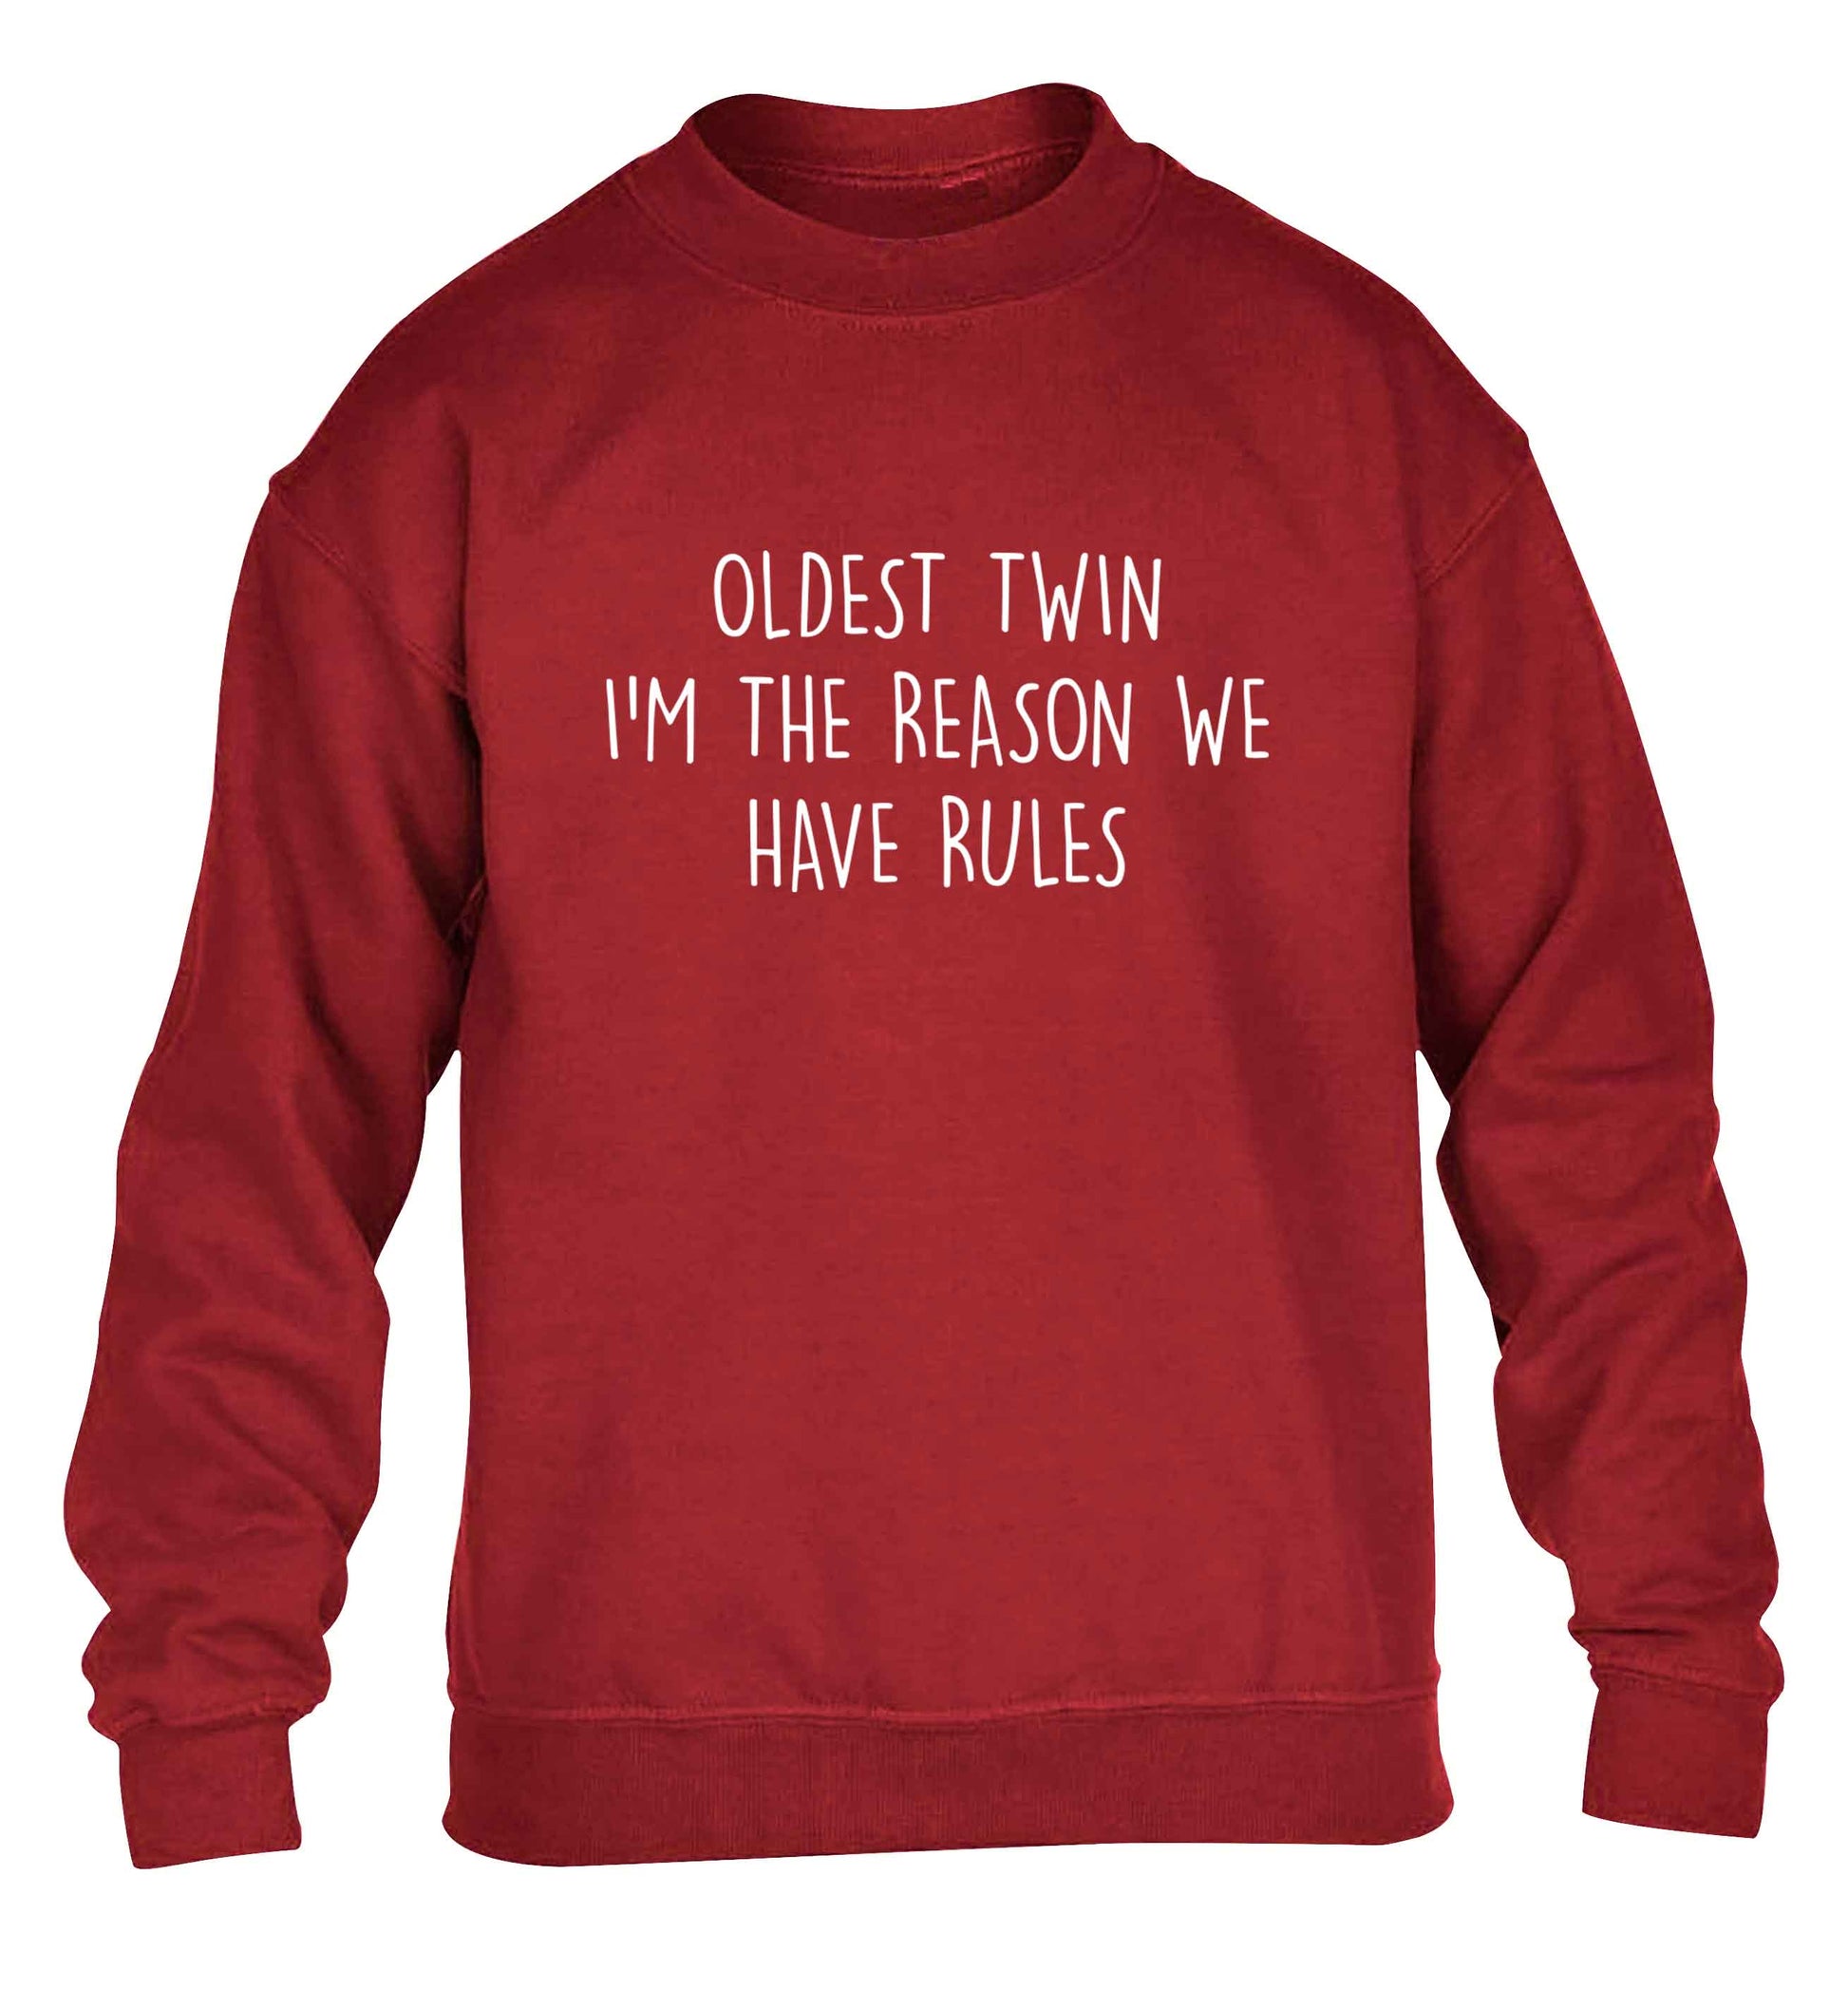 Oldest twin I'm the reason we have rules children's grey sweater 12-13 Years